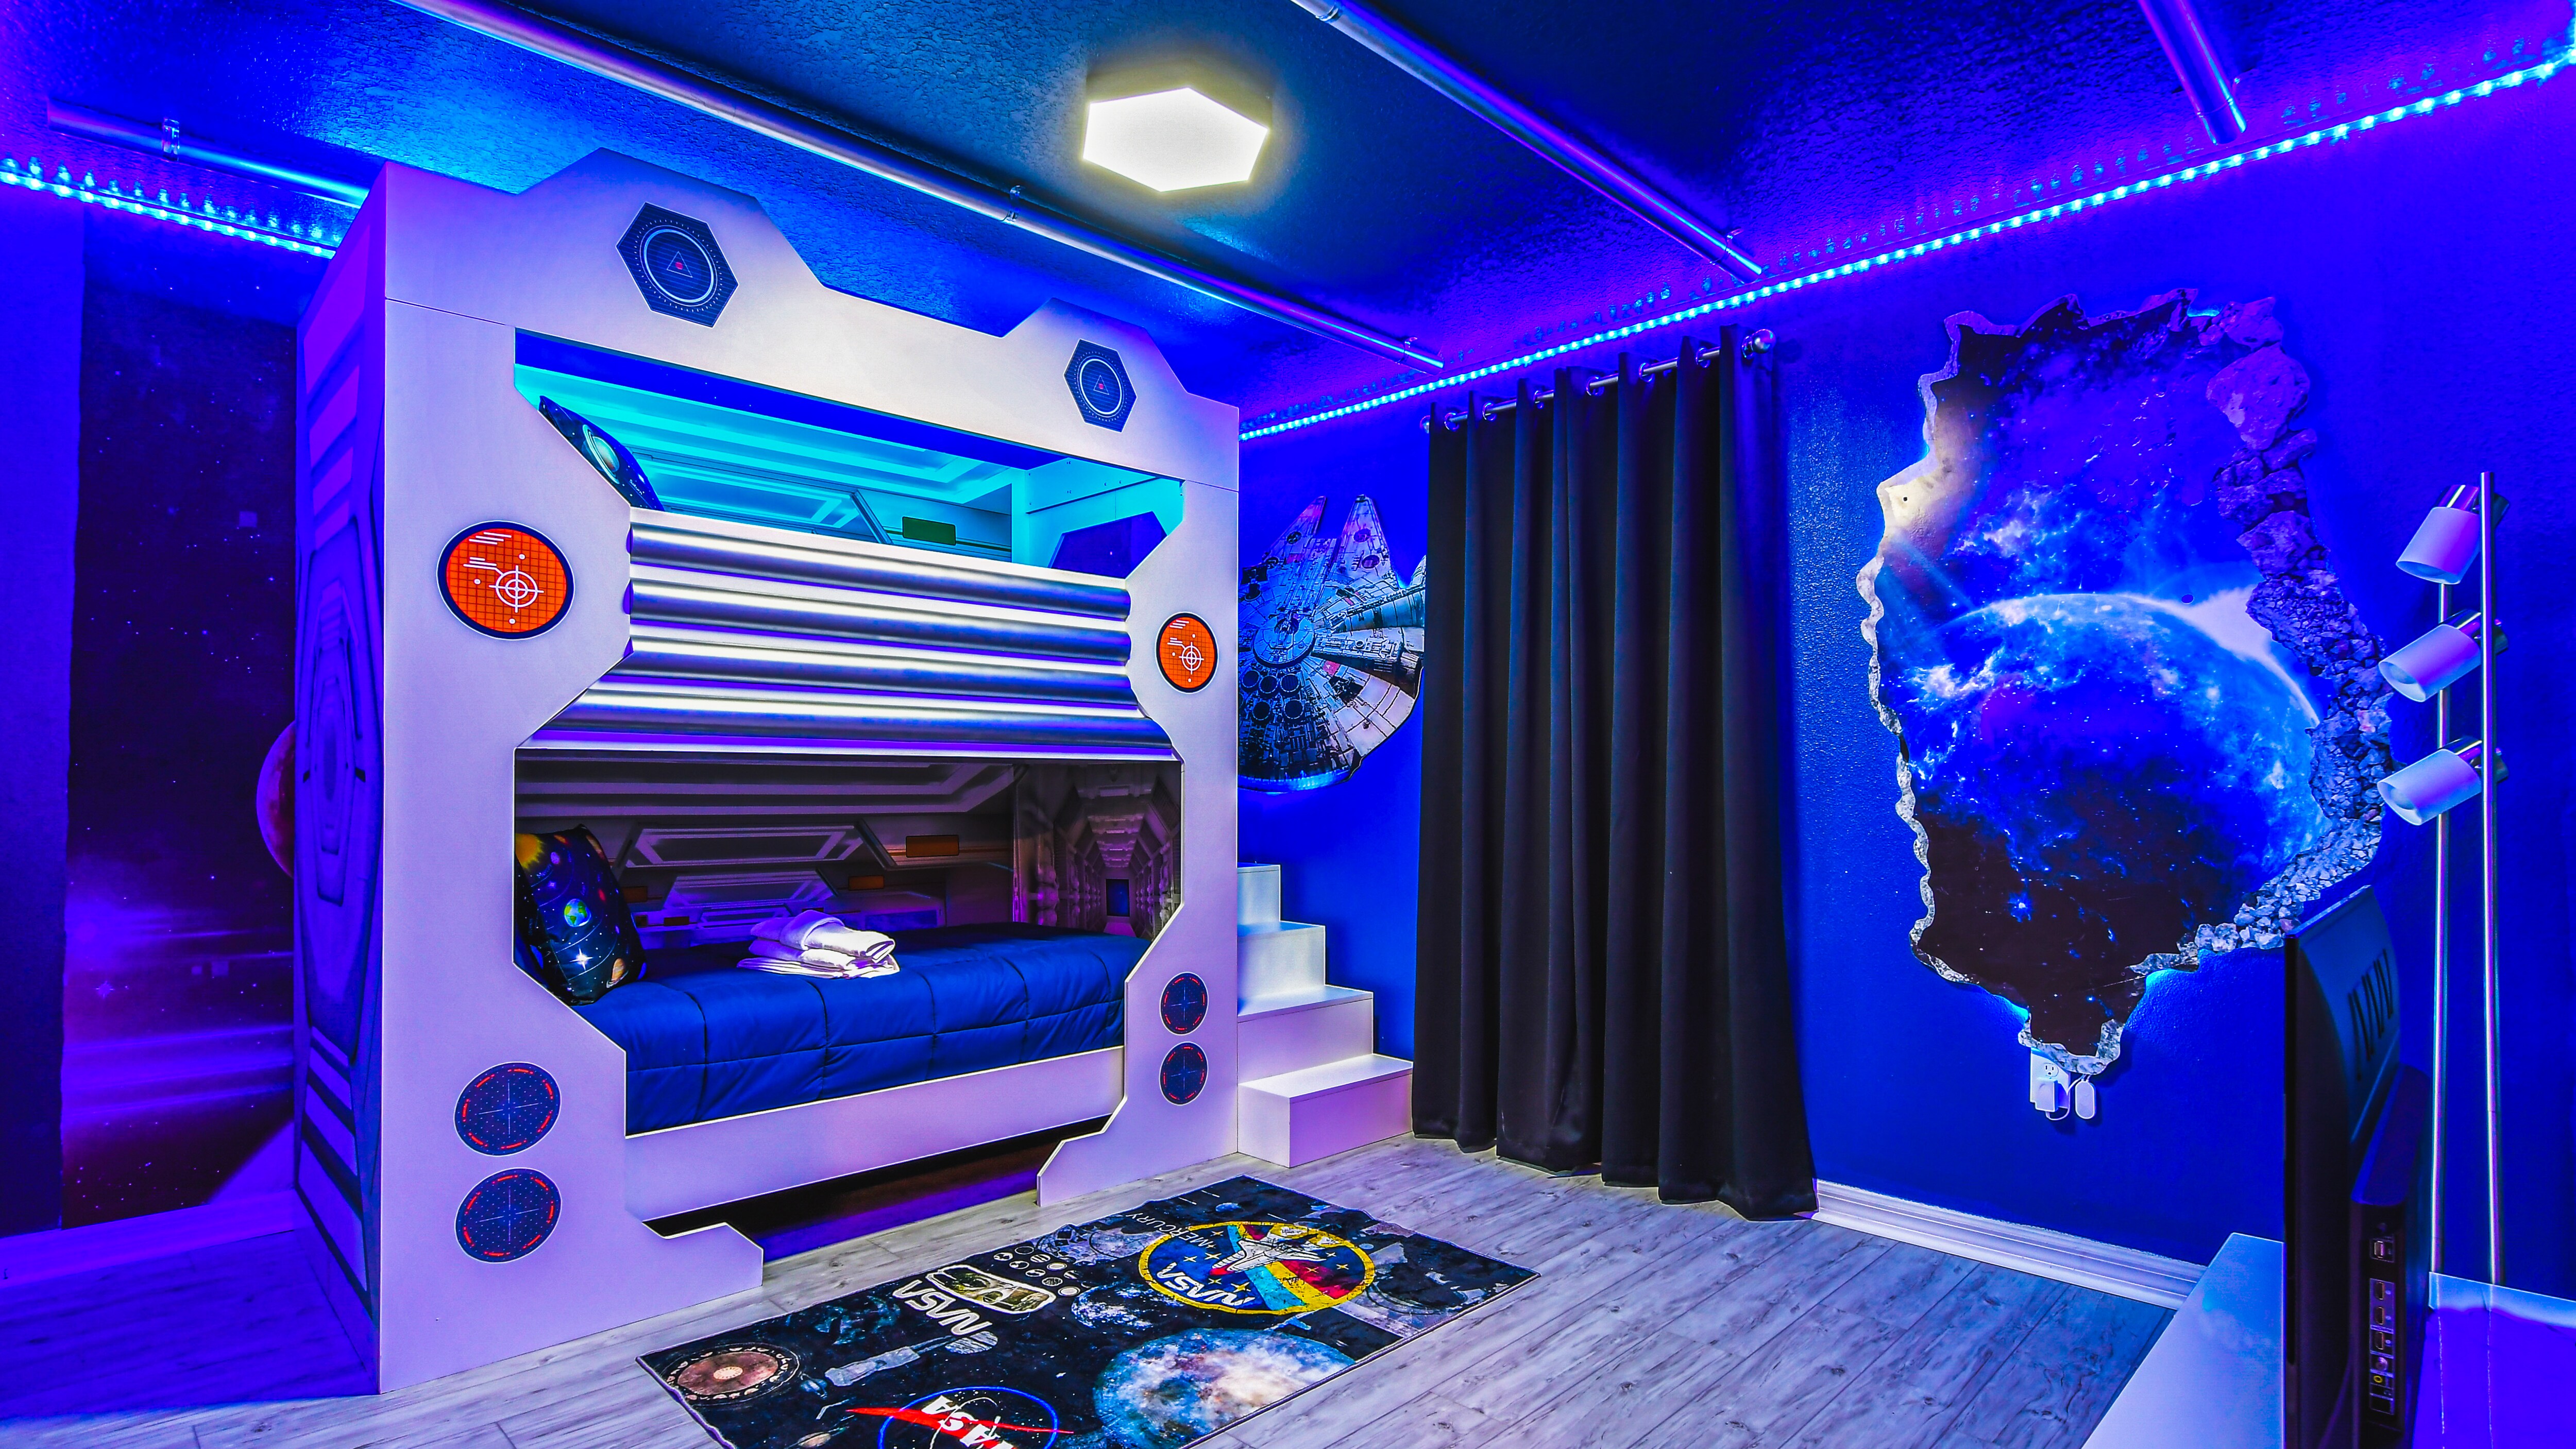 Kids will love the upstairs bedroom with a cool Star Wars theme